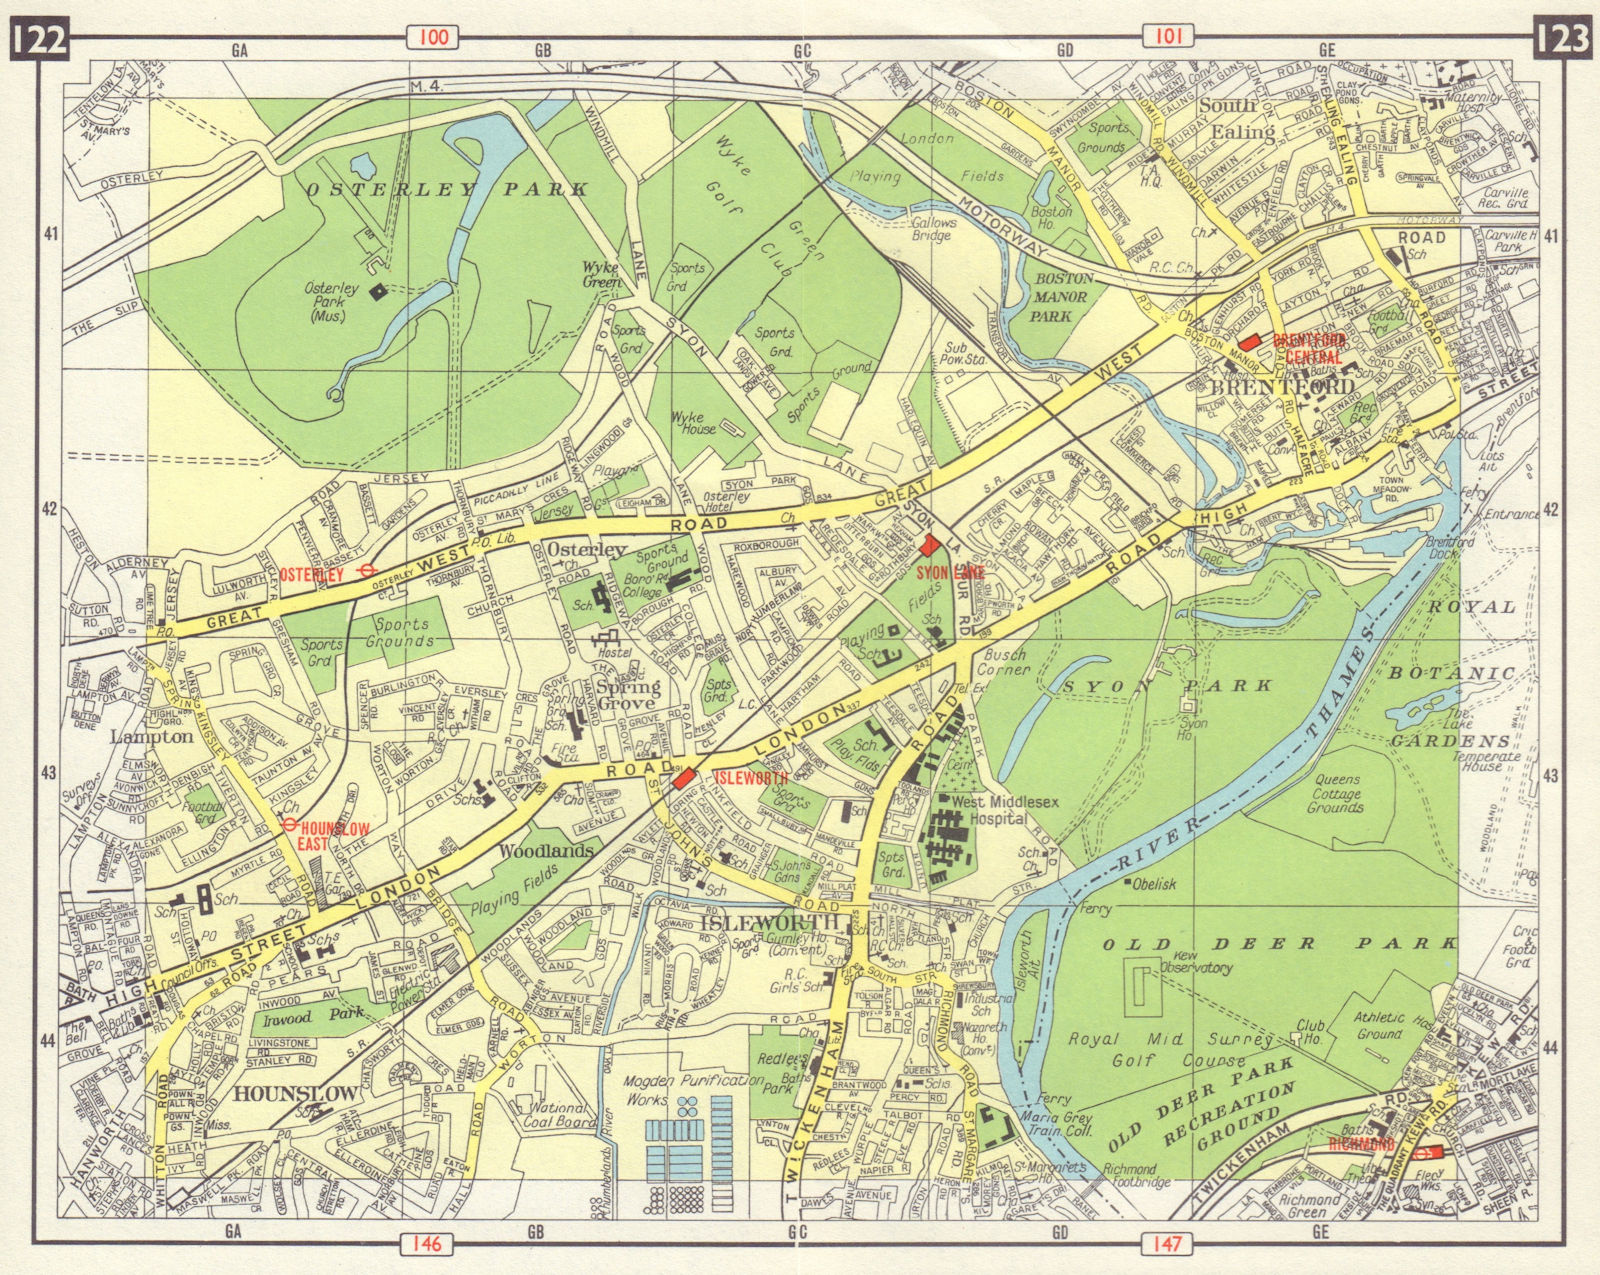 SW LONDON Hounslow Isleworth Osterley Brentford Richmond M4 open 1965 old map